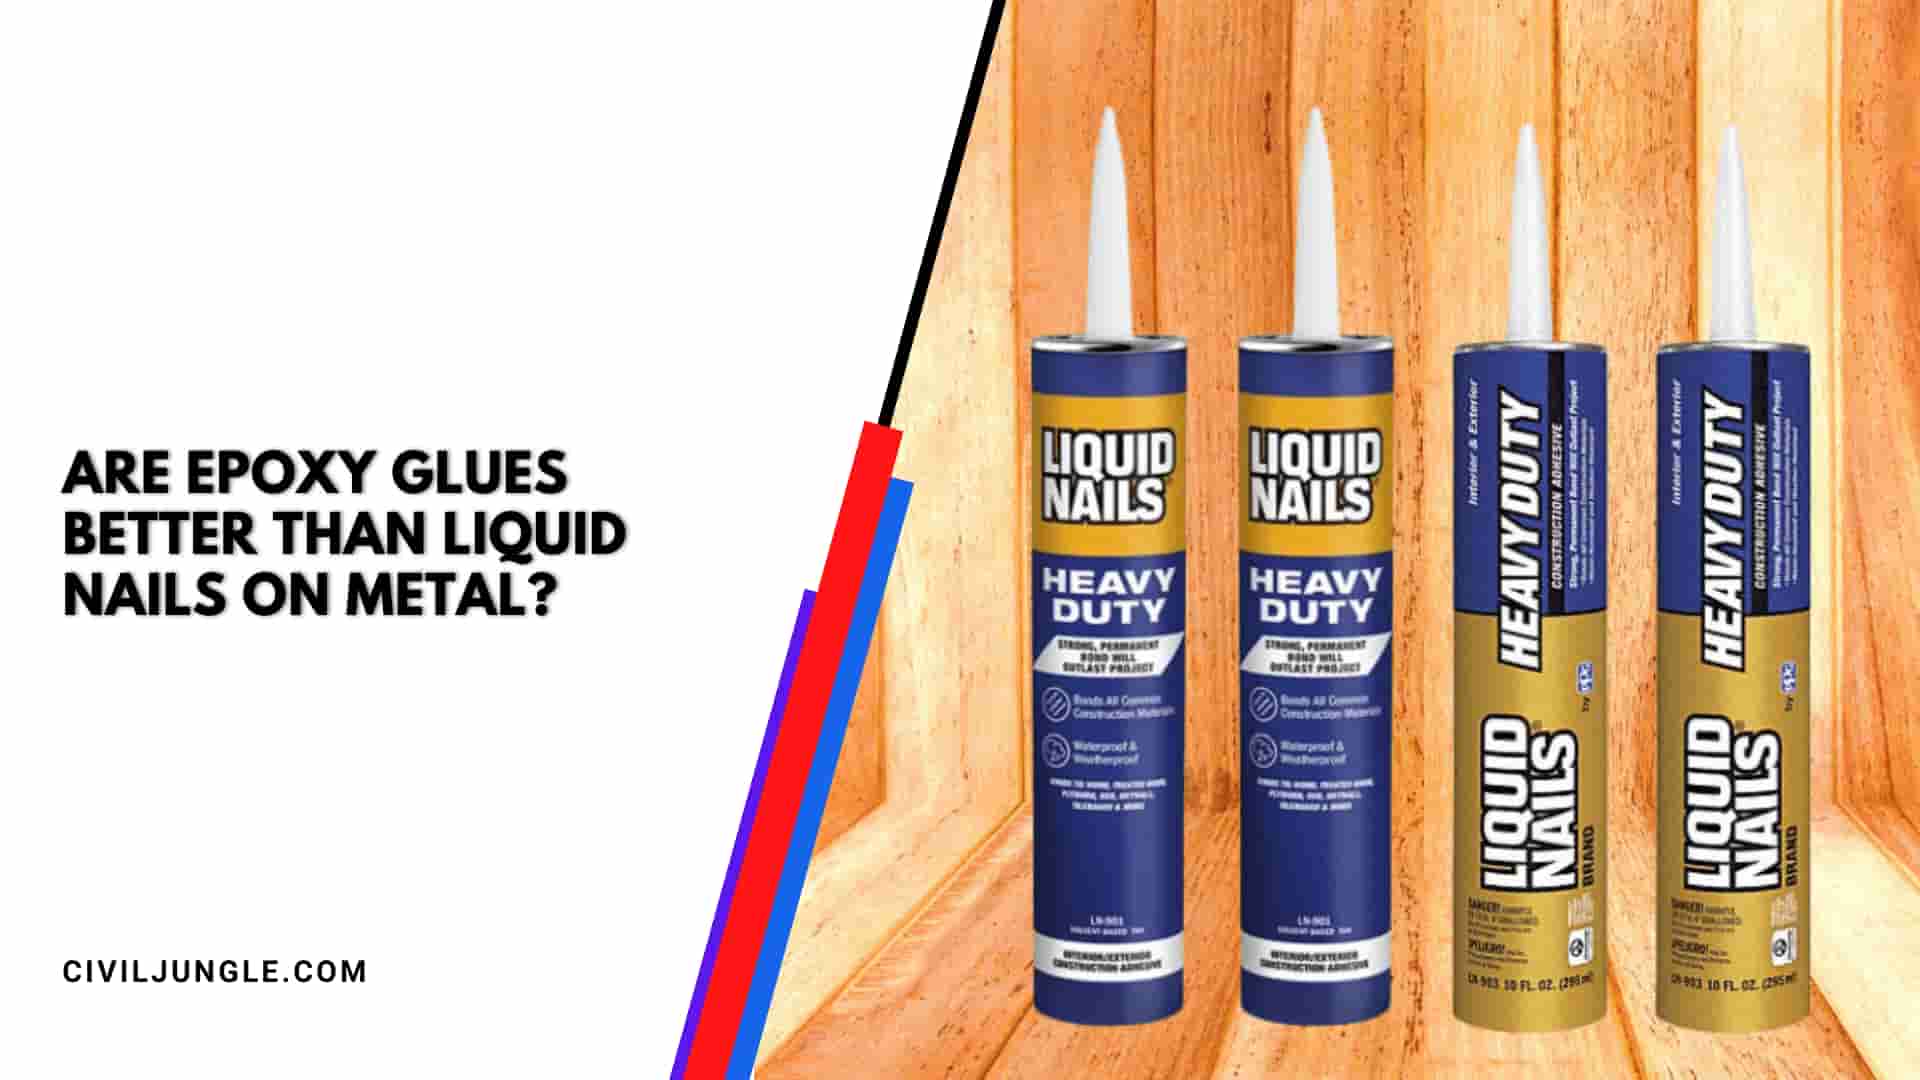 Are Epoxy Glues Better Than Liquid Nails on Metal?